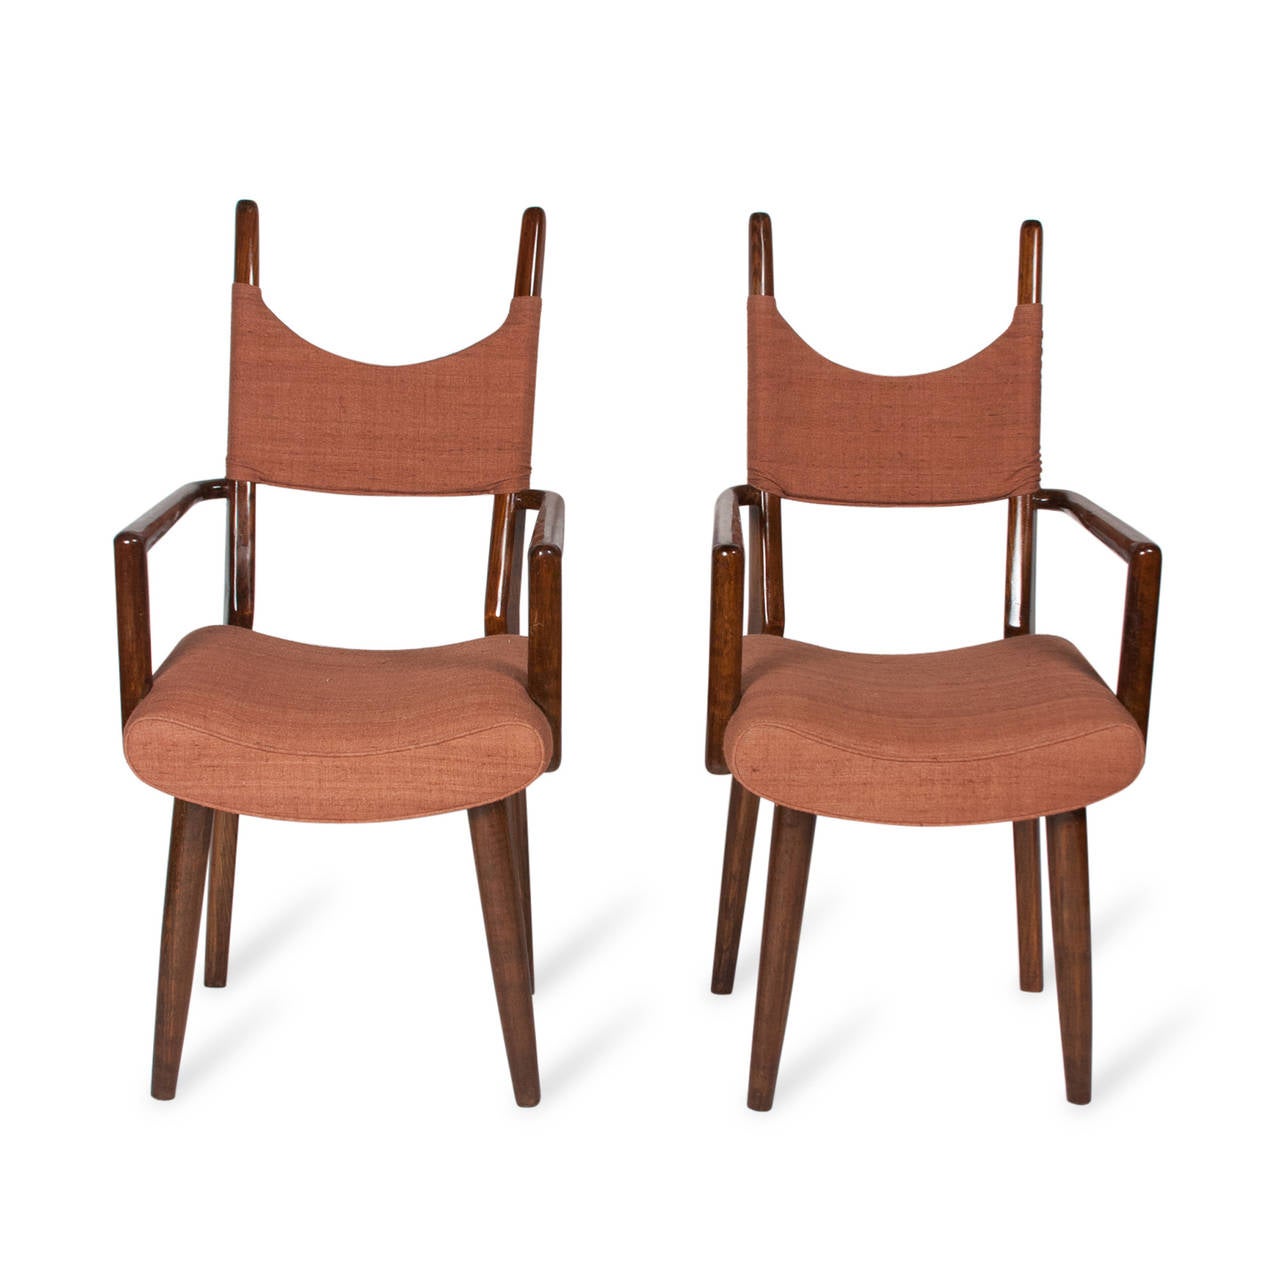 Pair of Palissandre Dining Chairs by Jean Royere, French, 1950s For Sale 1